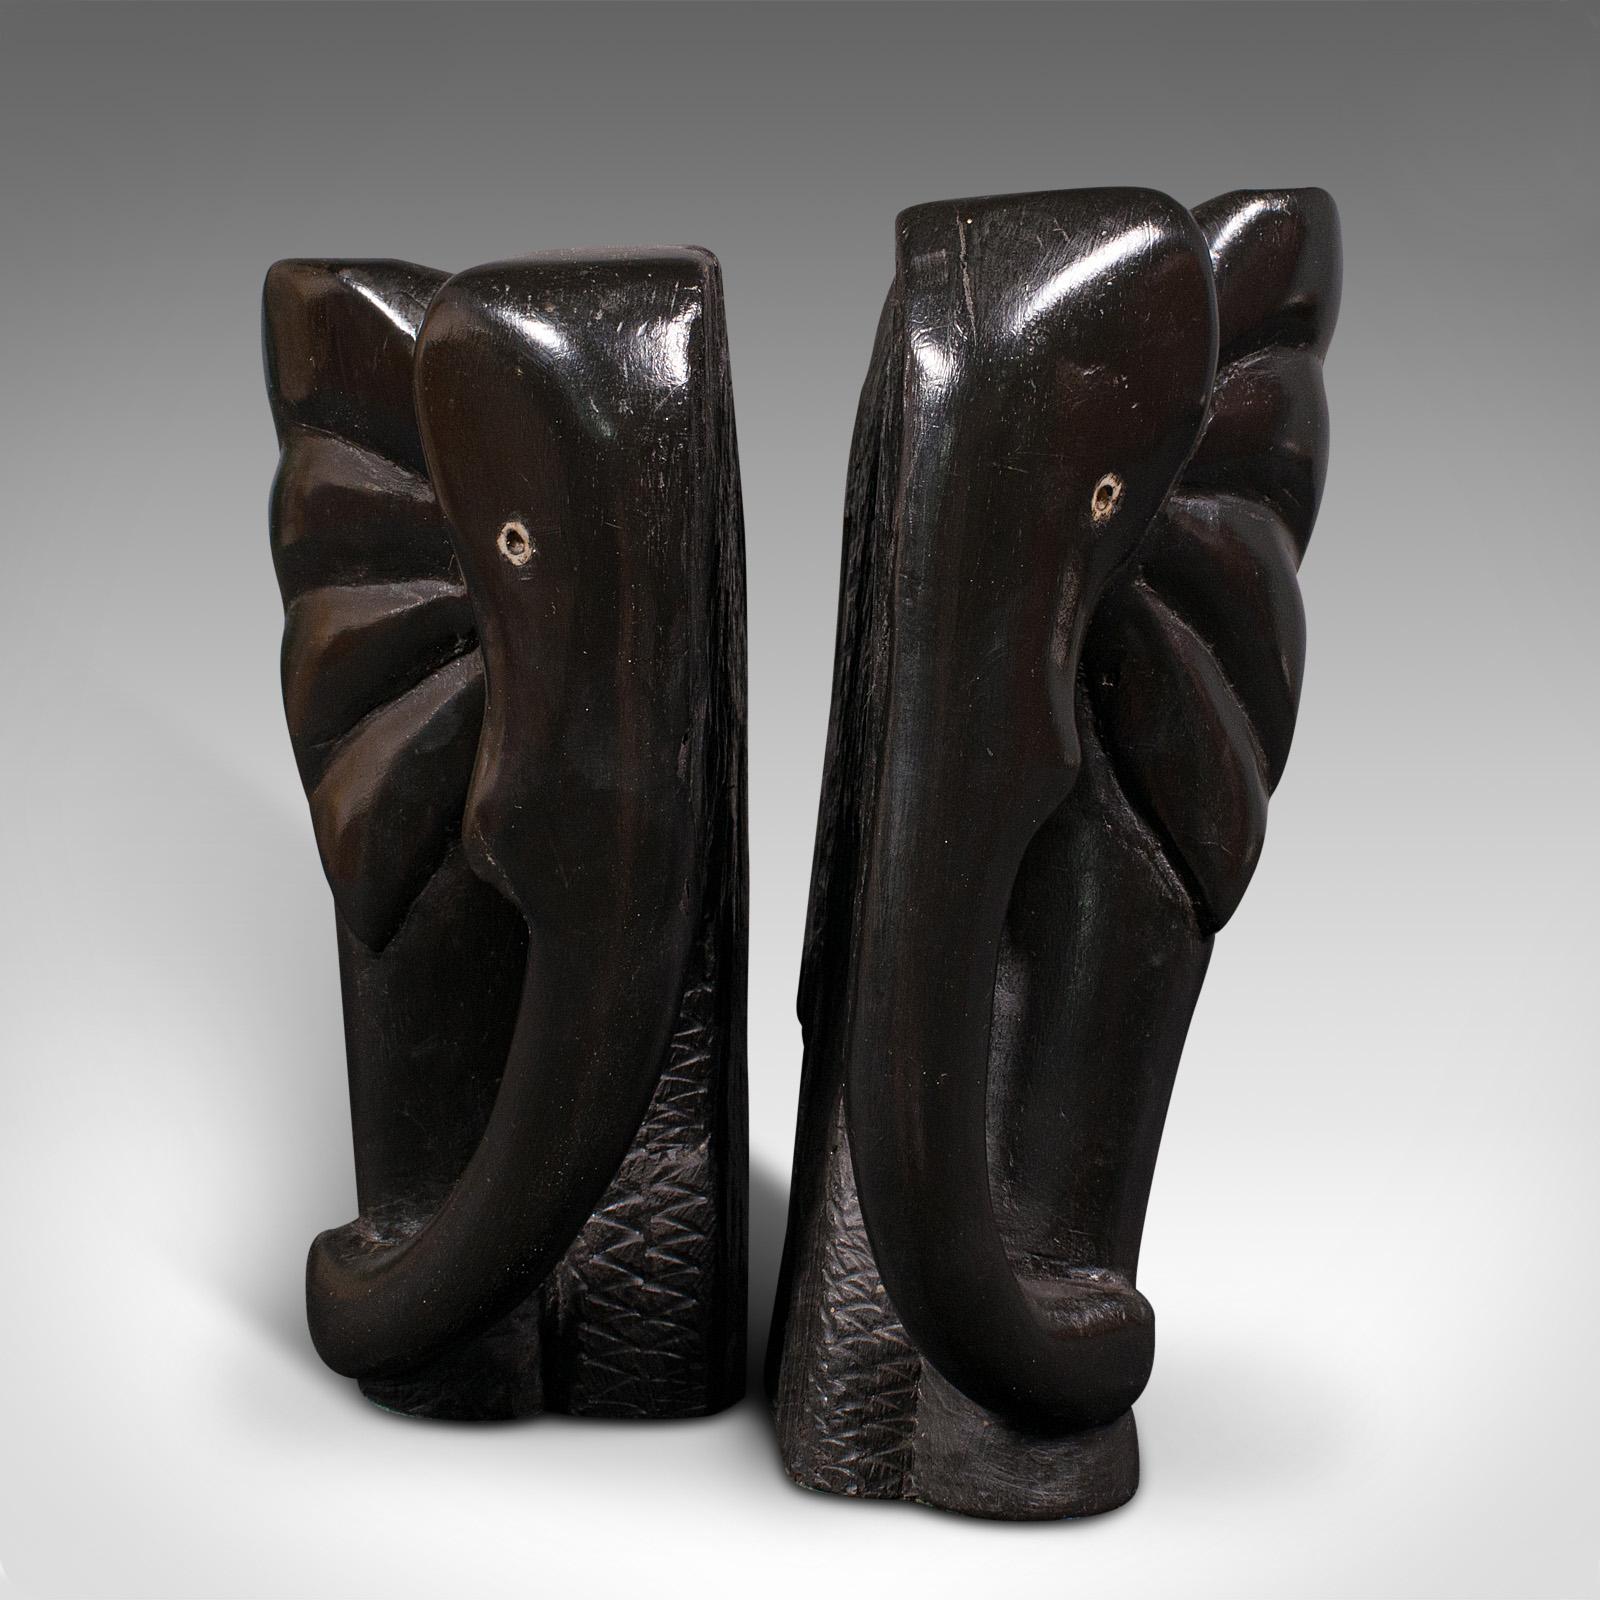 This is a pair of hand-carved elephant bookends. An African ebony decorative book rest, dating to the Victorian period, circa 1880.

Wonderful decorative bookends with a charming appearance
Displaying a desirable aged patina